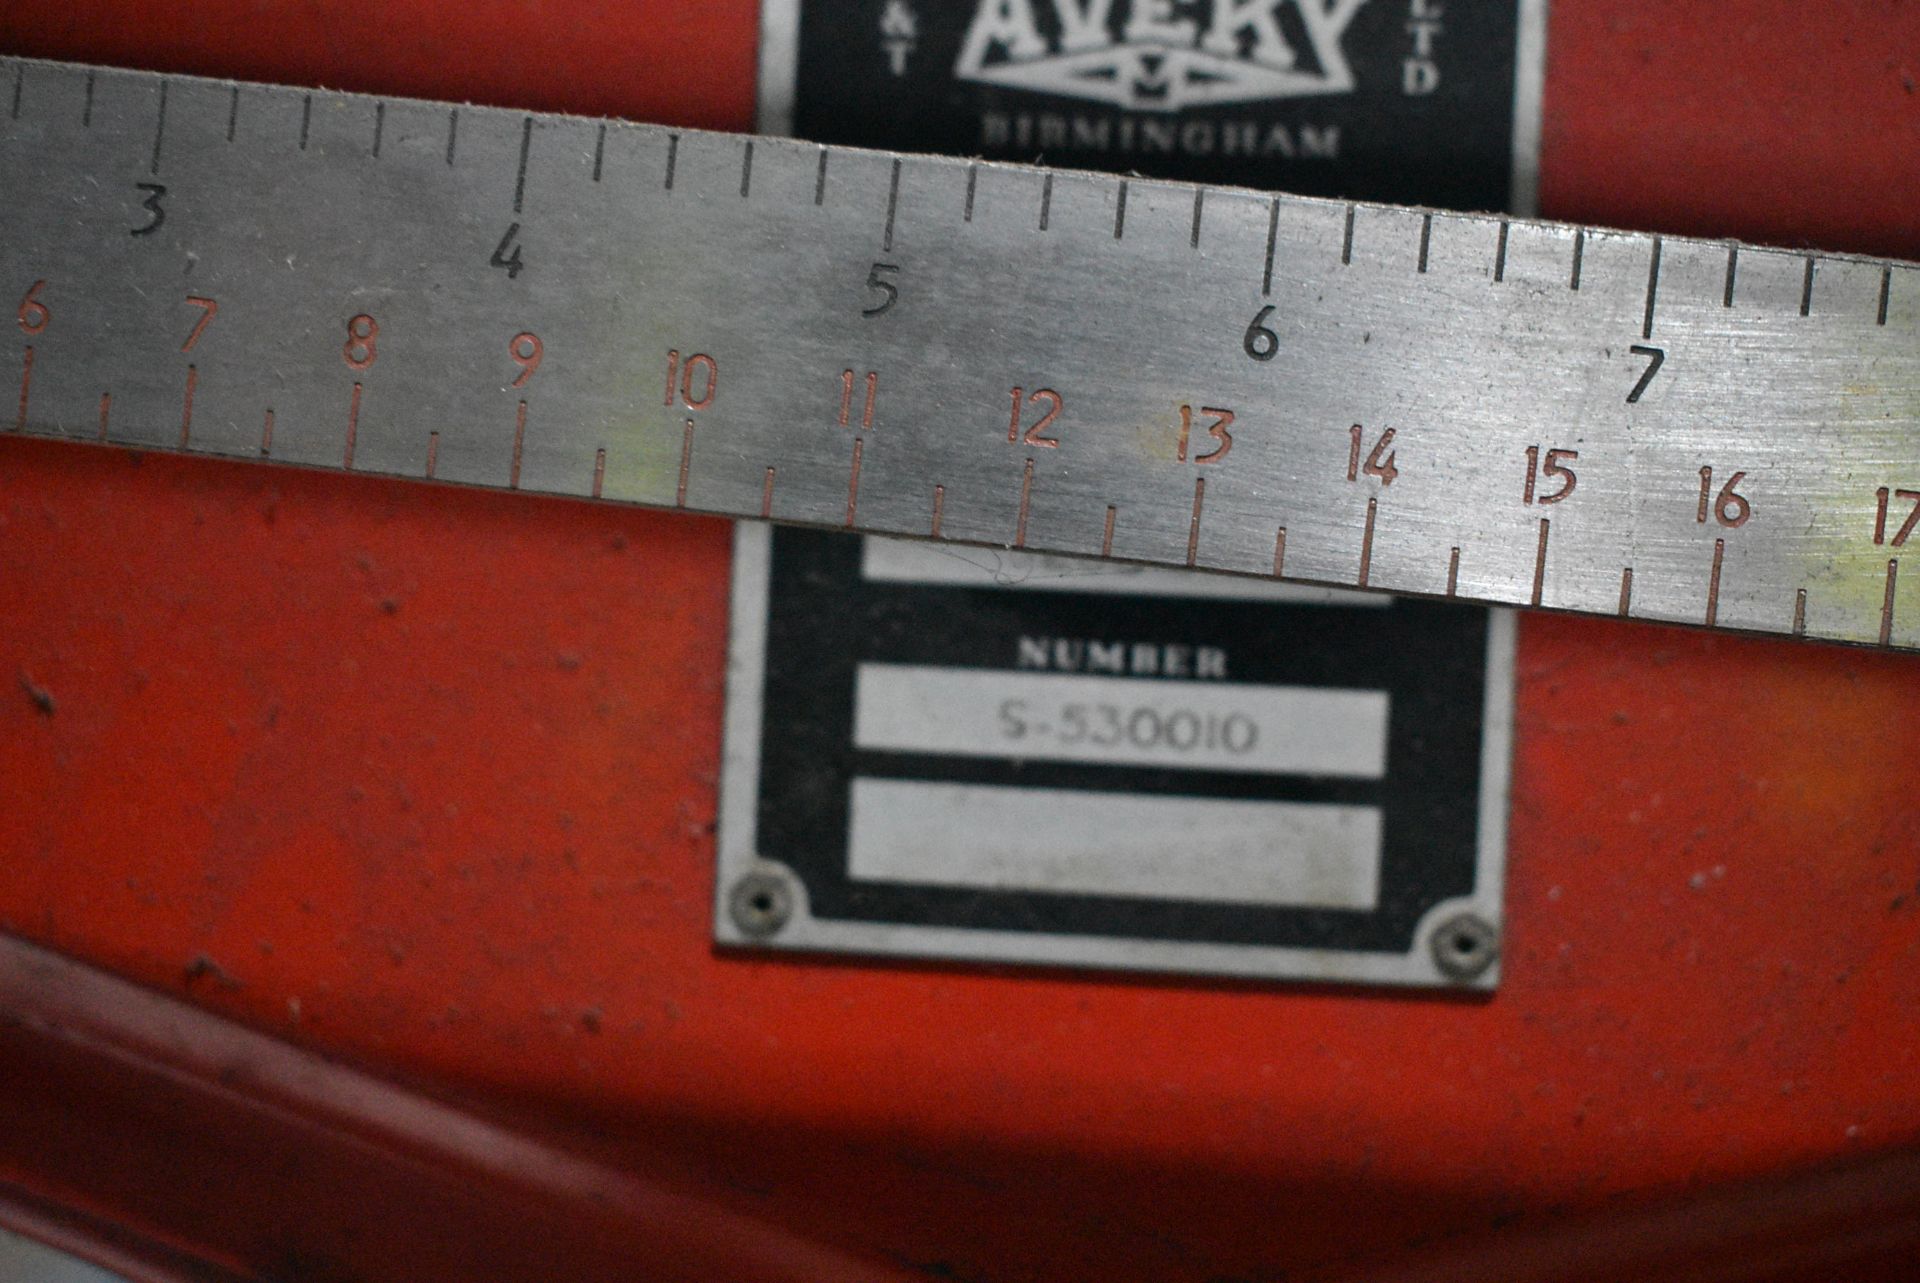 Avery 3205 CHE 110kg capacity Dial Indicating Portable Platform Weighing Machine, serial no. S- - Image 4 of 4